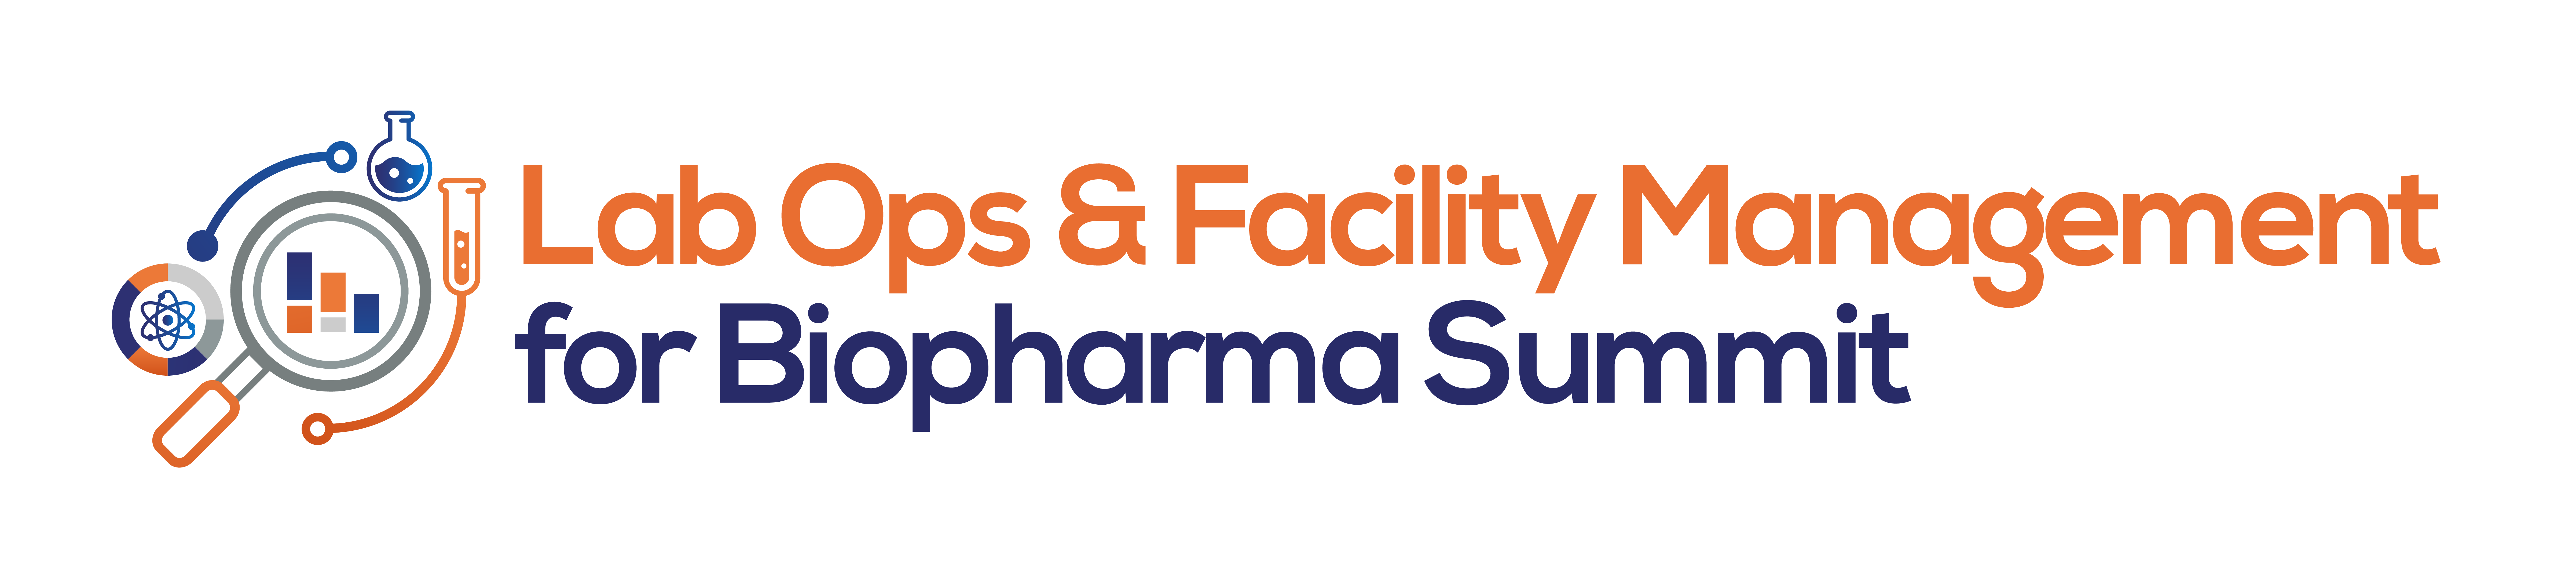 Lab Ops & Facility Management for Biopharma Summit COL